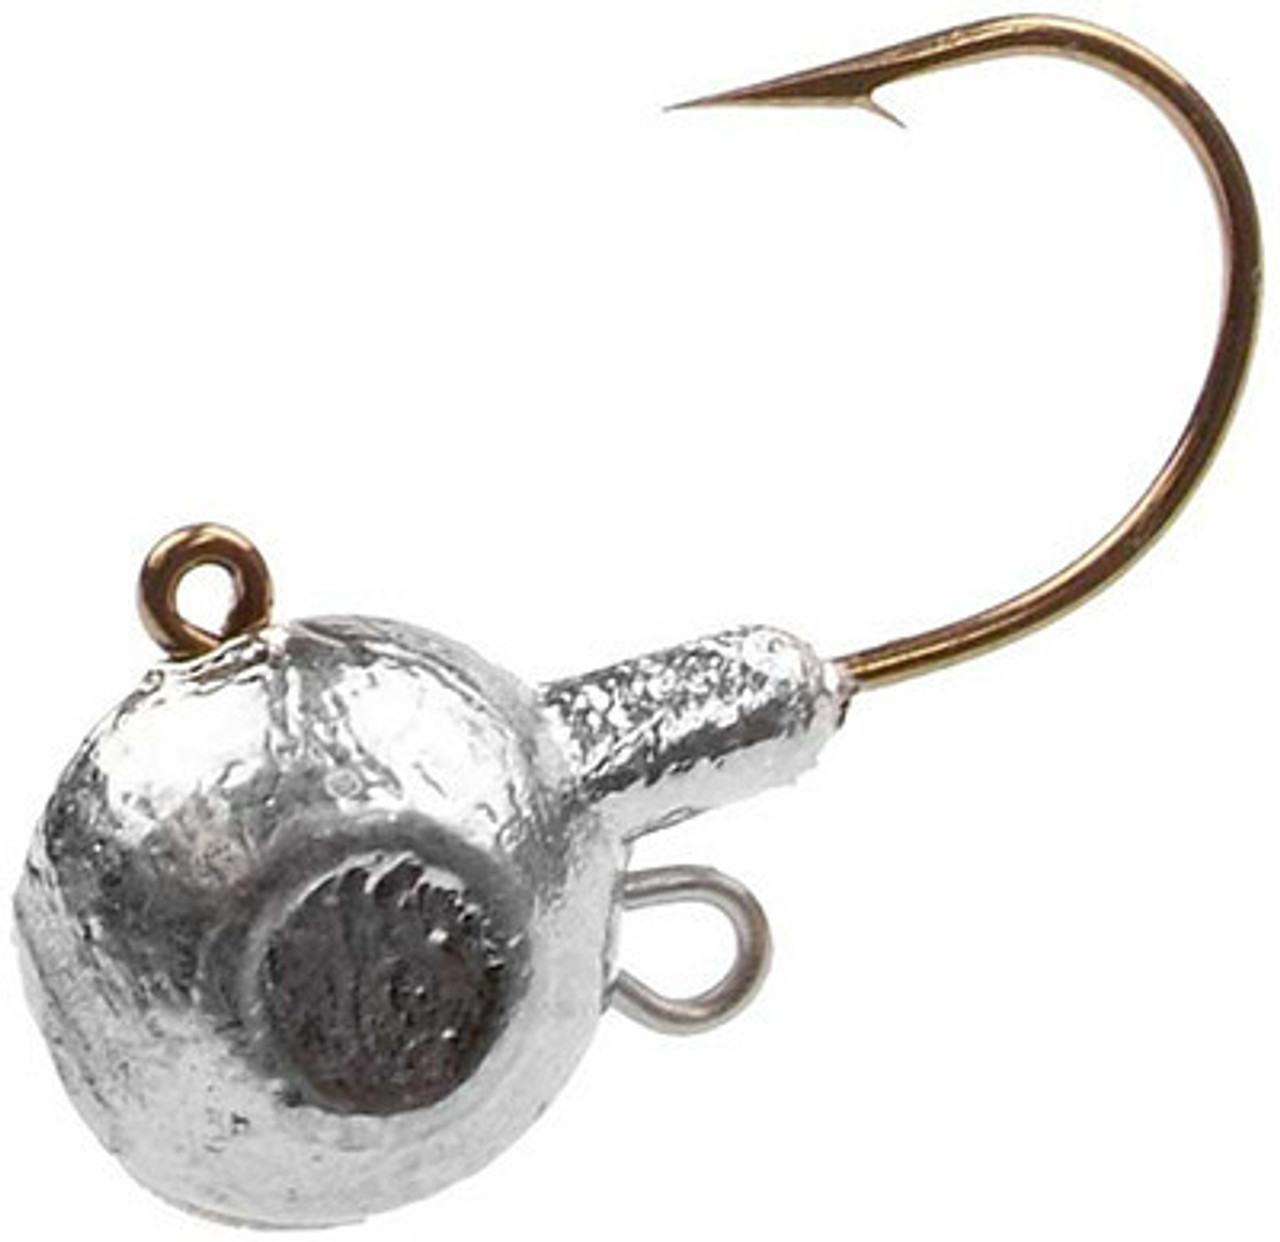 Do-It Live Bait Jig Mold with Stinger Eye - Barlow's Tackle